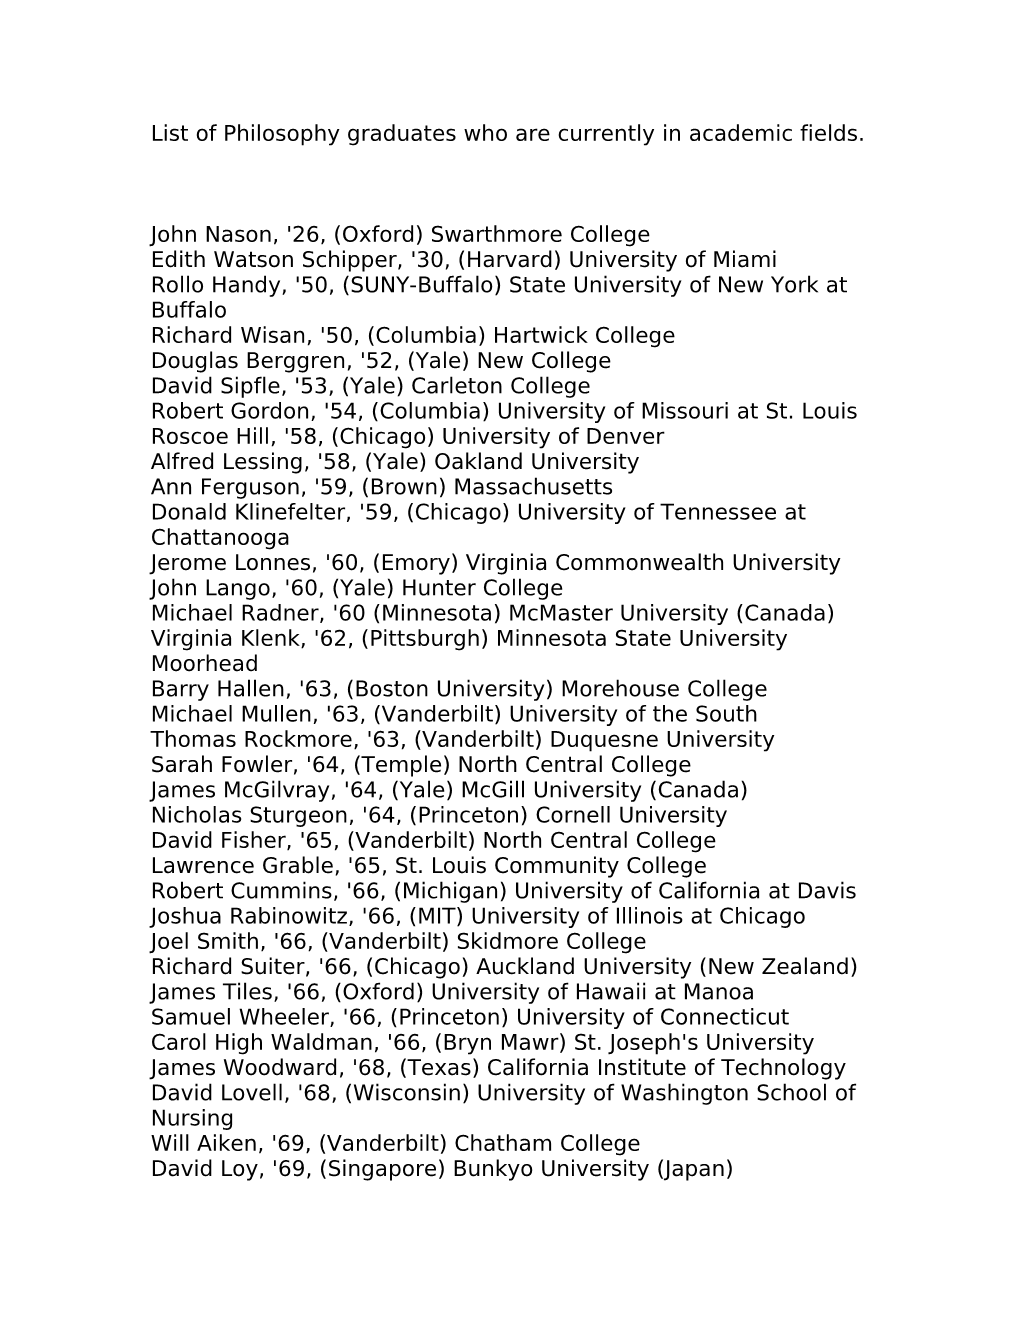 List of Philosophy Graduates Who Are Currently in Academic Fields